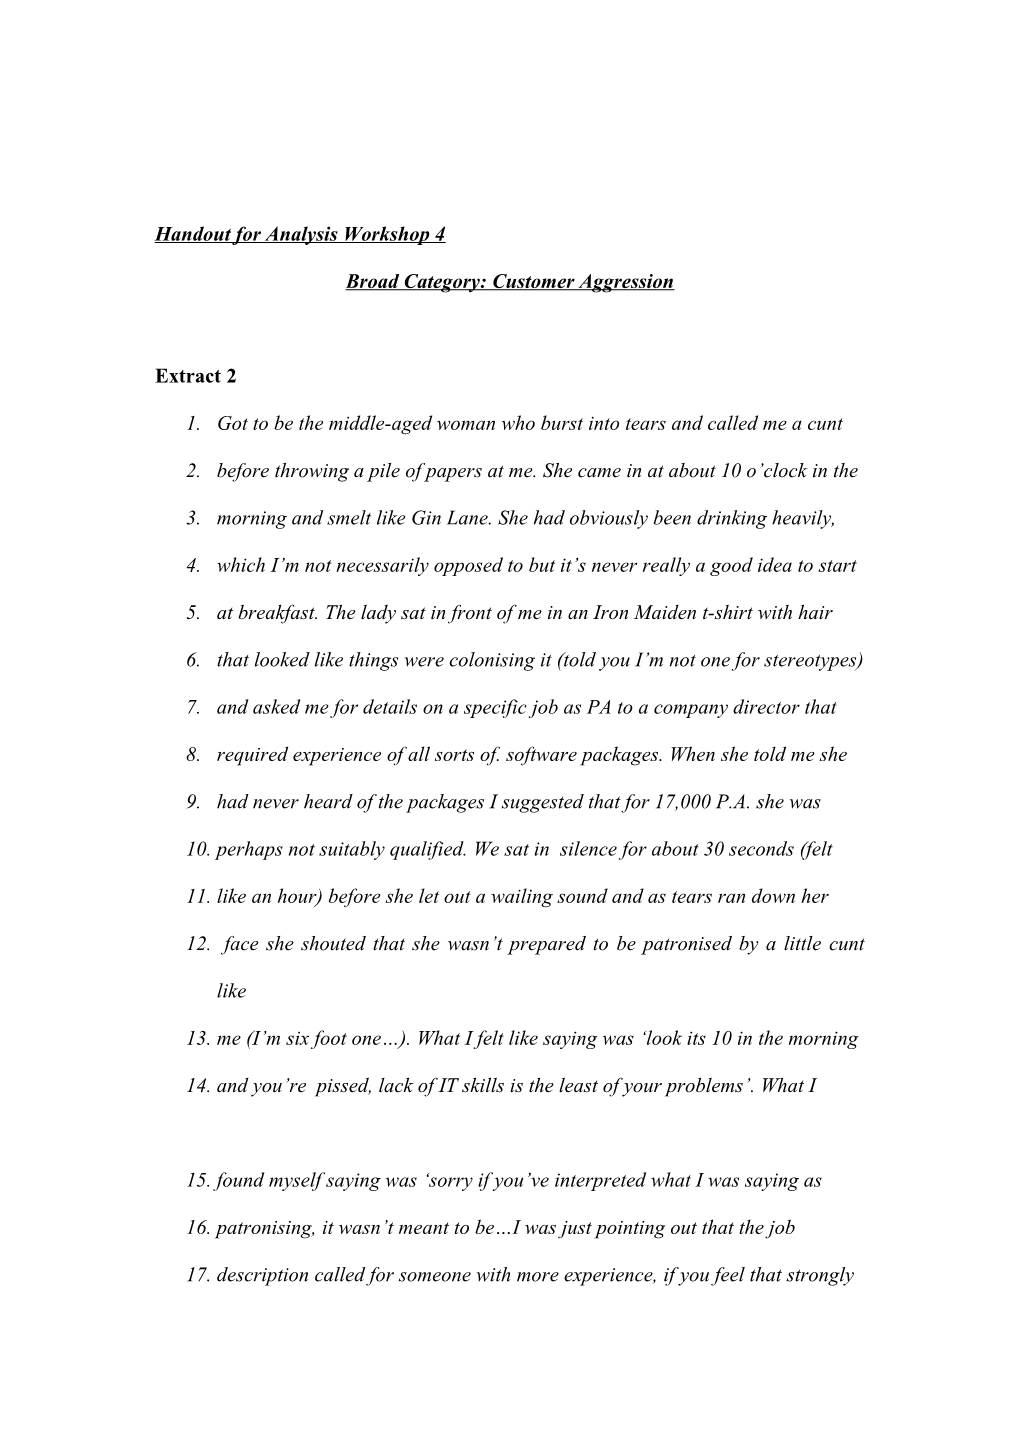 Broad Category: Customer Aggression: Handout for Analysis Workshop